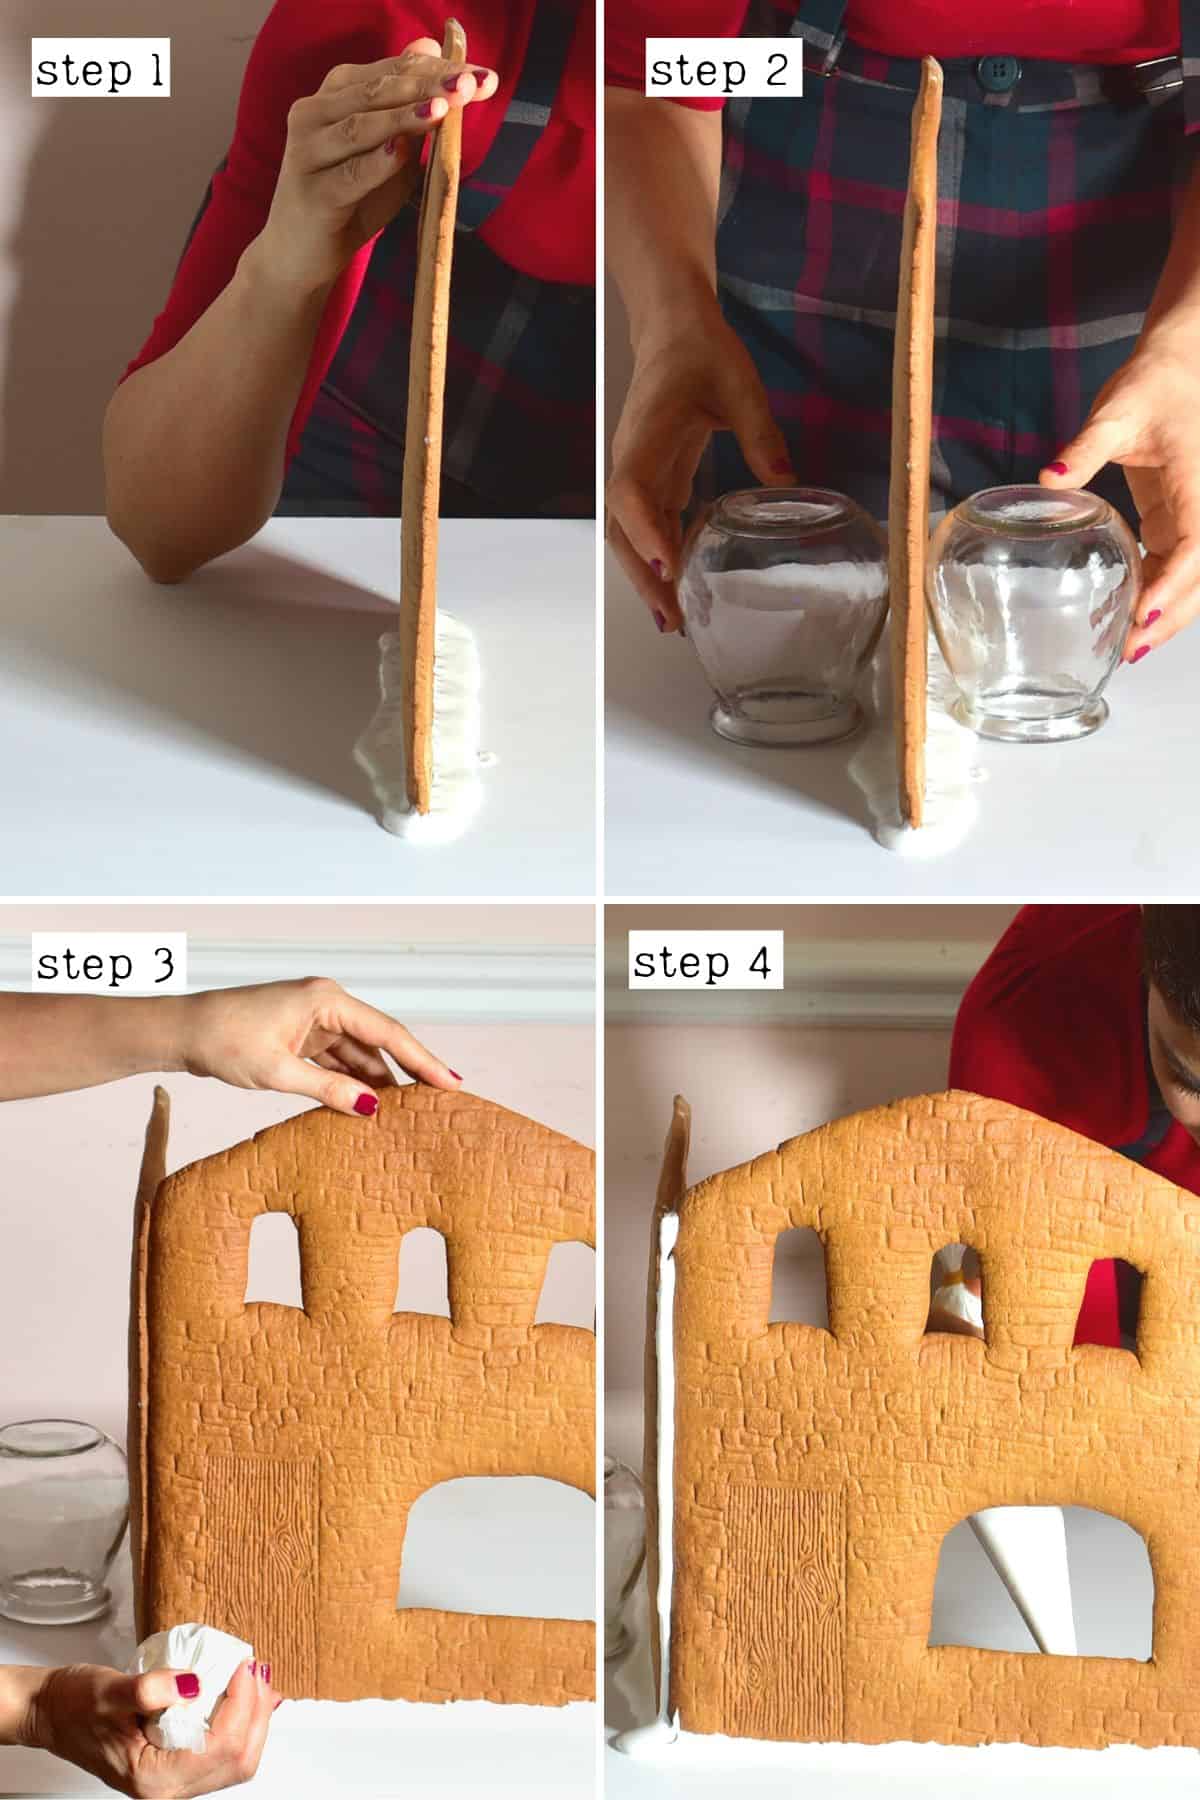 Steps for building a gingerbread house